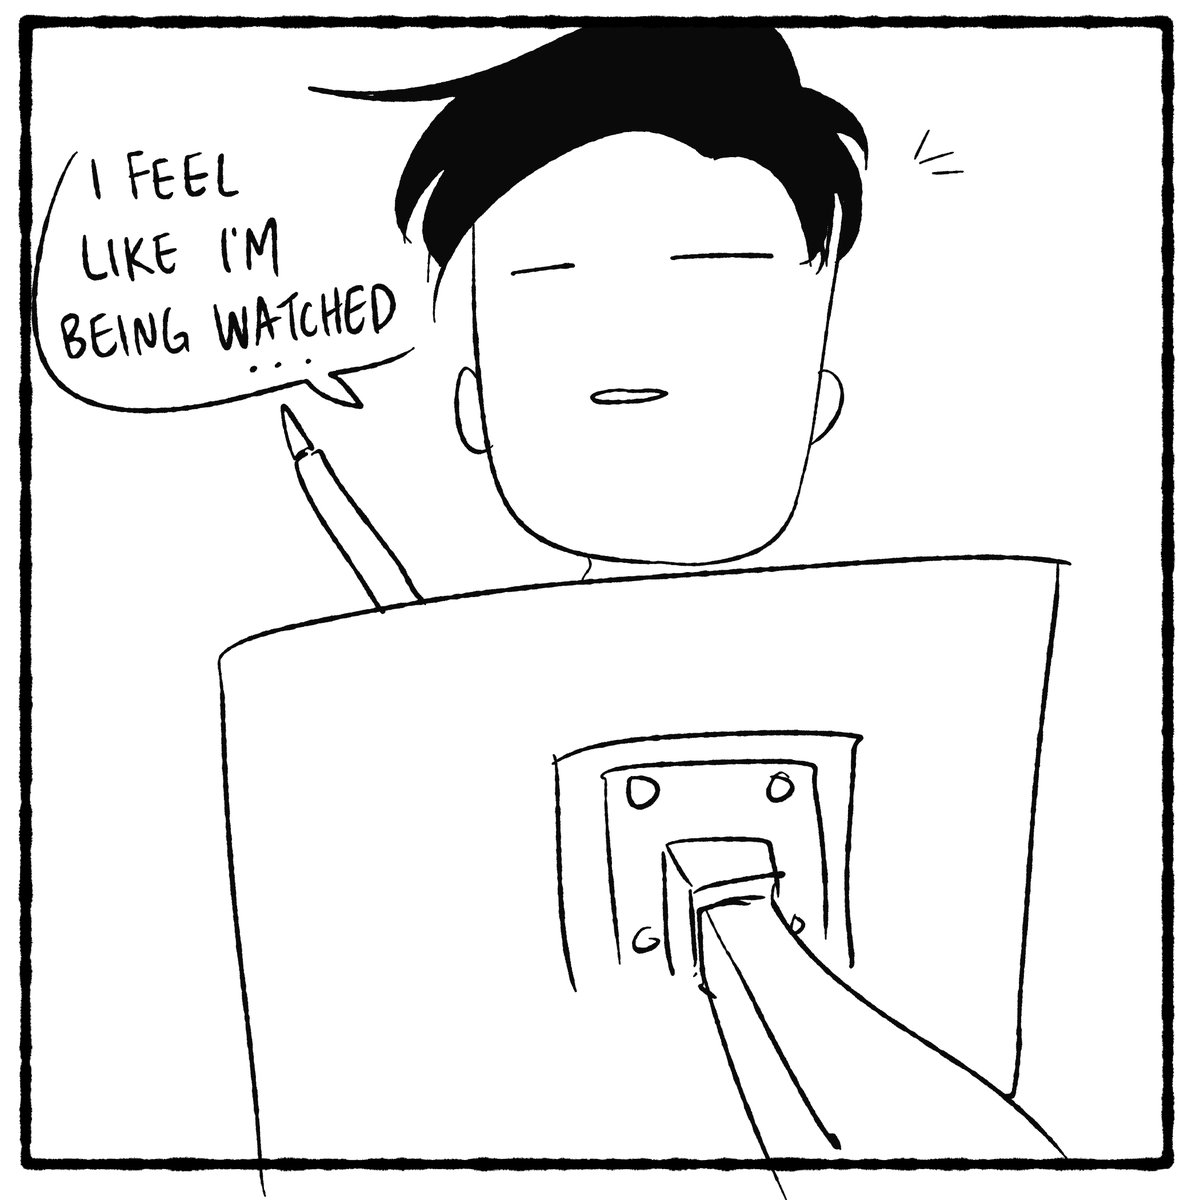 11am of hourly comic day: I'm being watched https://t.co/uq0FfoElcr 